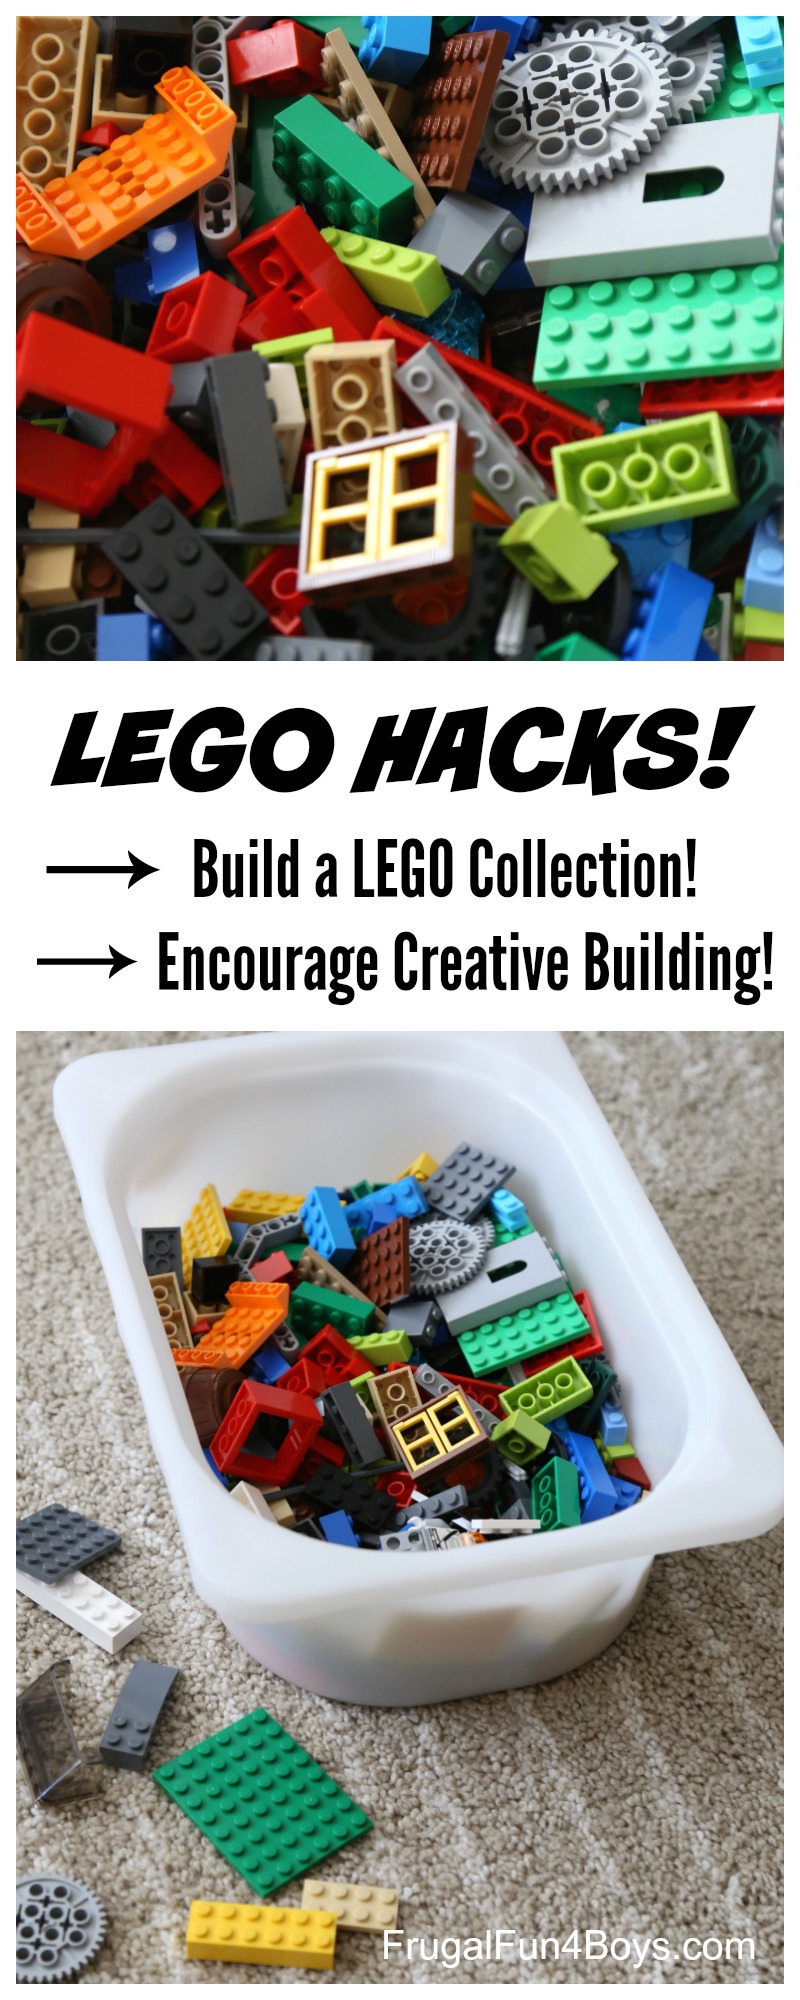 LEGO Hacks for Building a Collection and Encouraging Creative Building